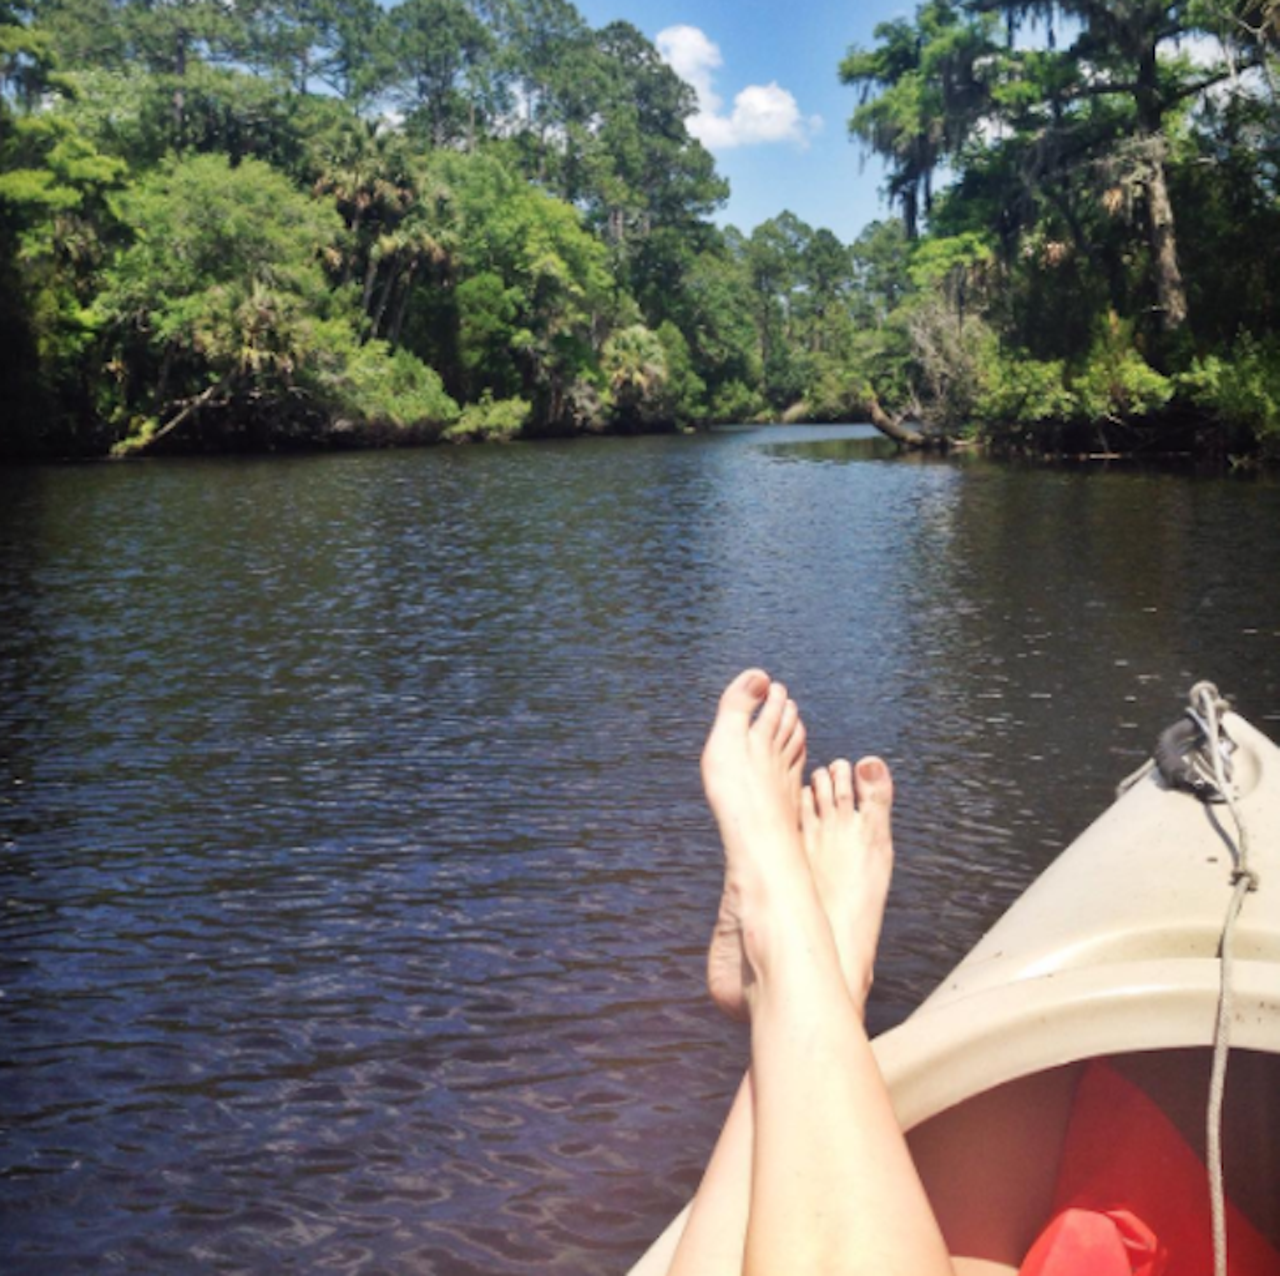 Faver-Dykes State Park
Distance from Orlando: 1 hour 30 minutes
Both primitive and RV camping are available at this spot known for its tranquility. It has four hiking nature trails of varying length with tons of wildlife for campers to check out.
Photo via mightyblonde/Instagram